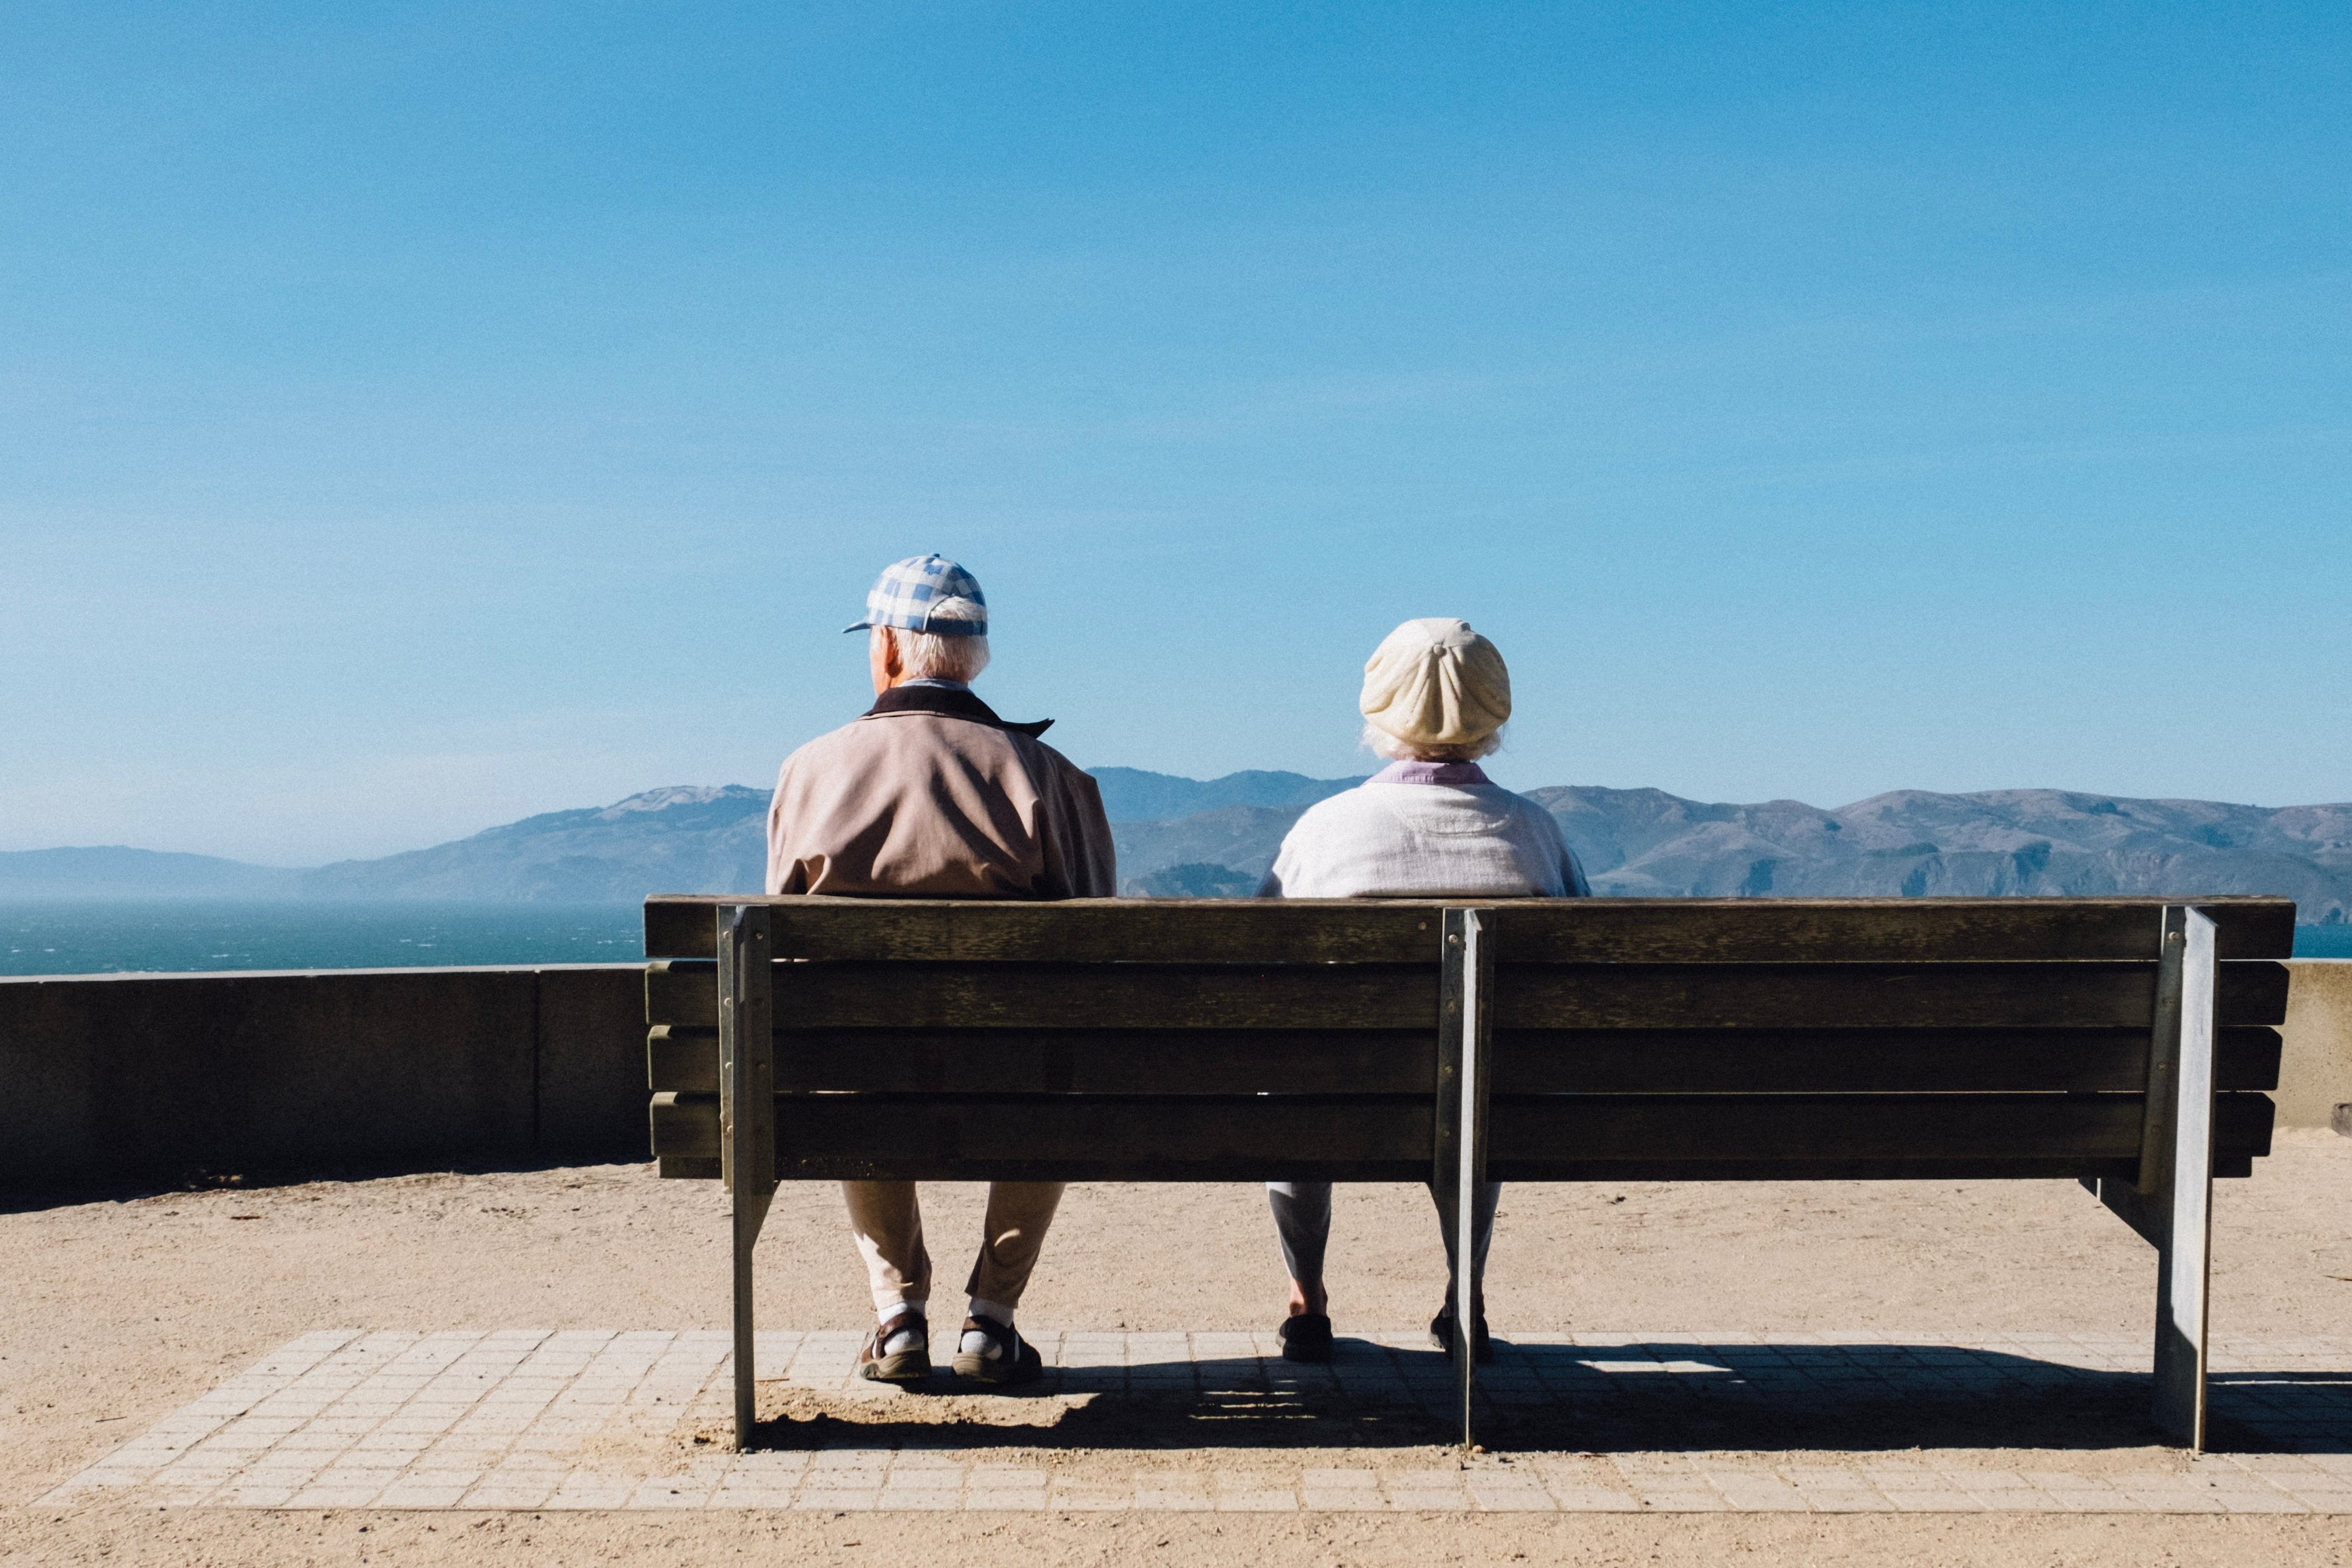 An old couple sitting on a bench | Source: Unsplash.com